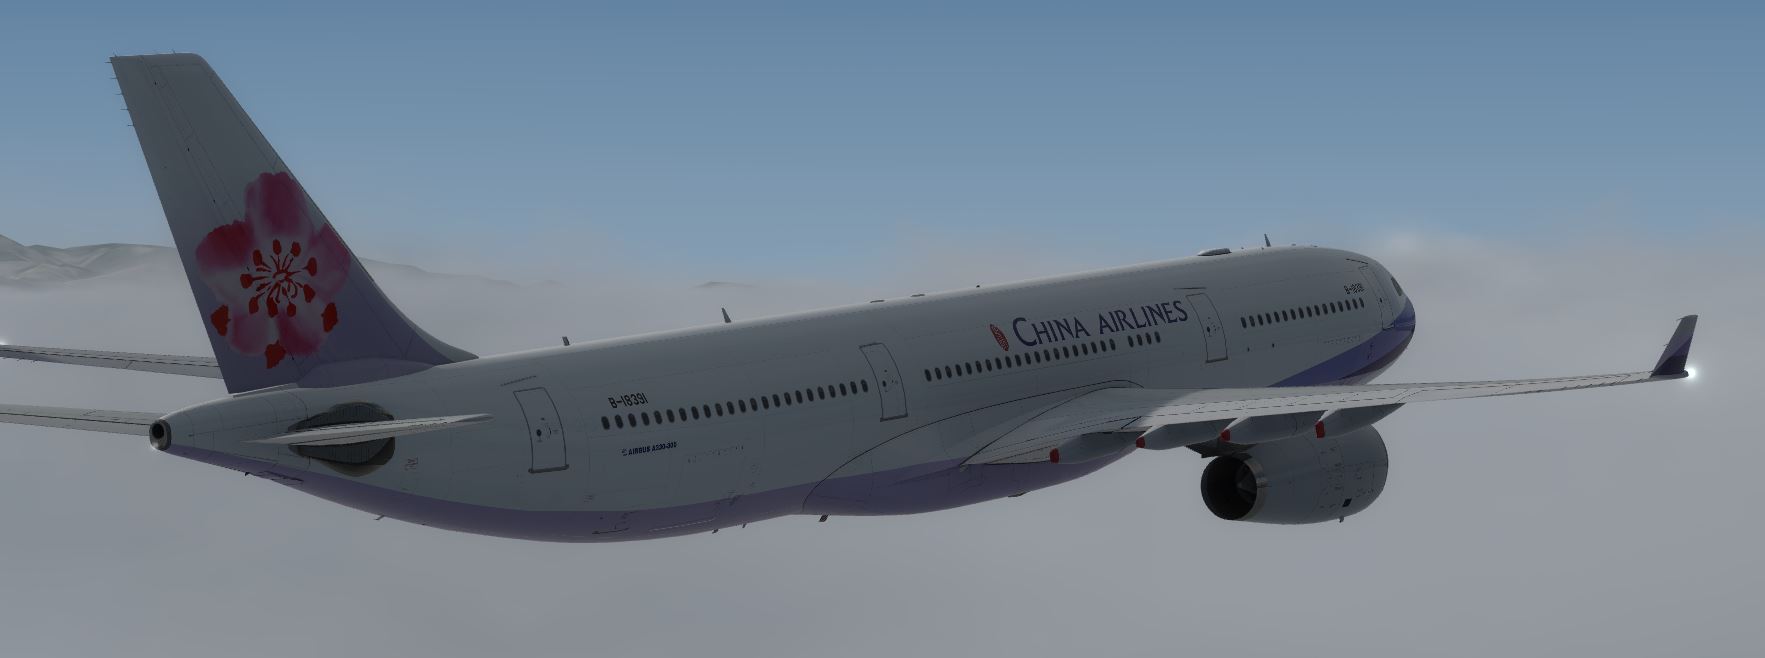 AS A330 ChinaAirline-6656 